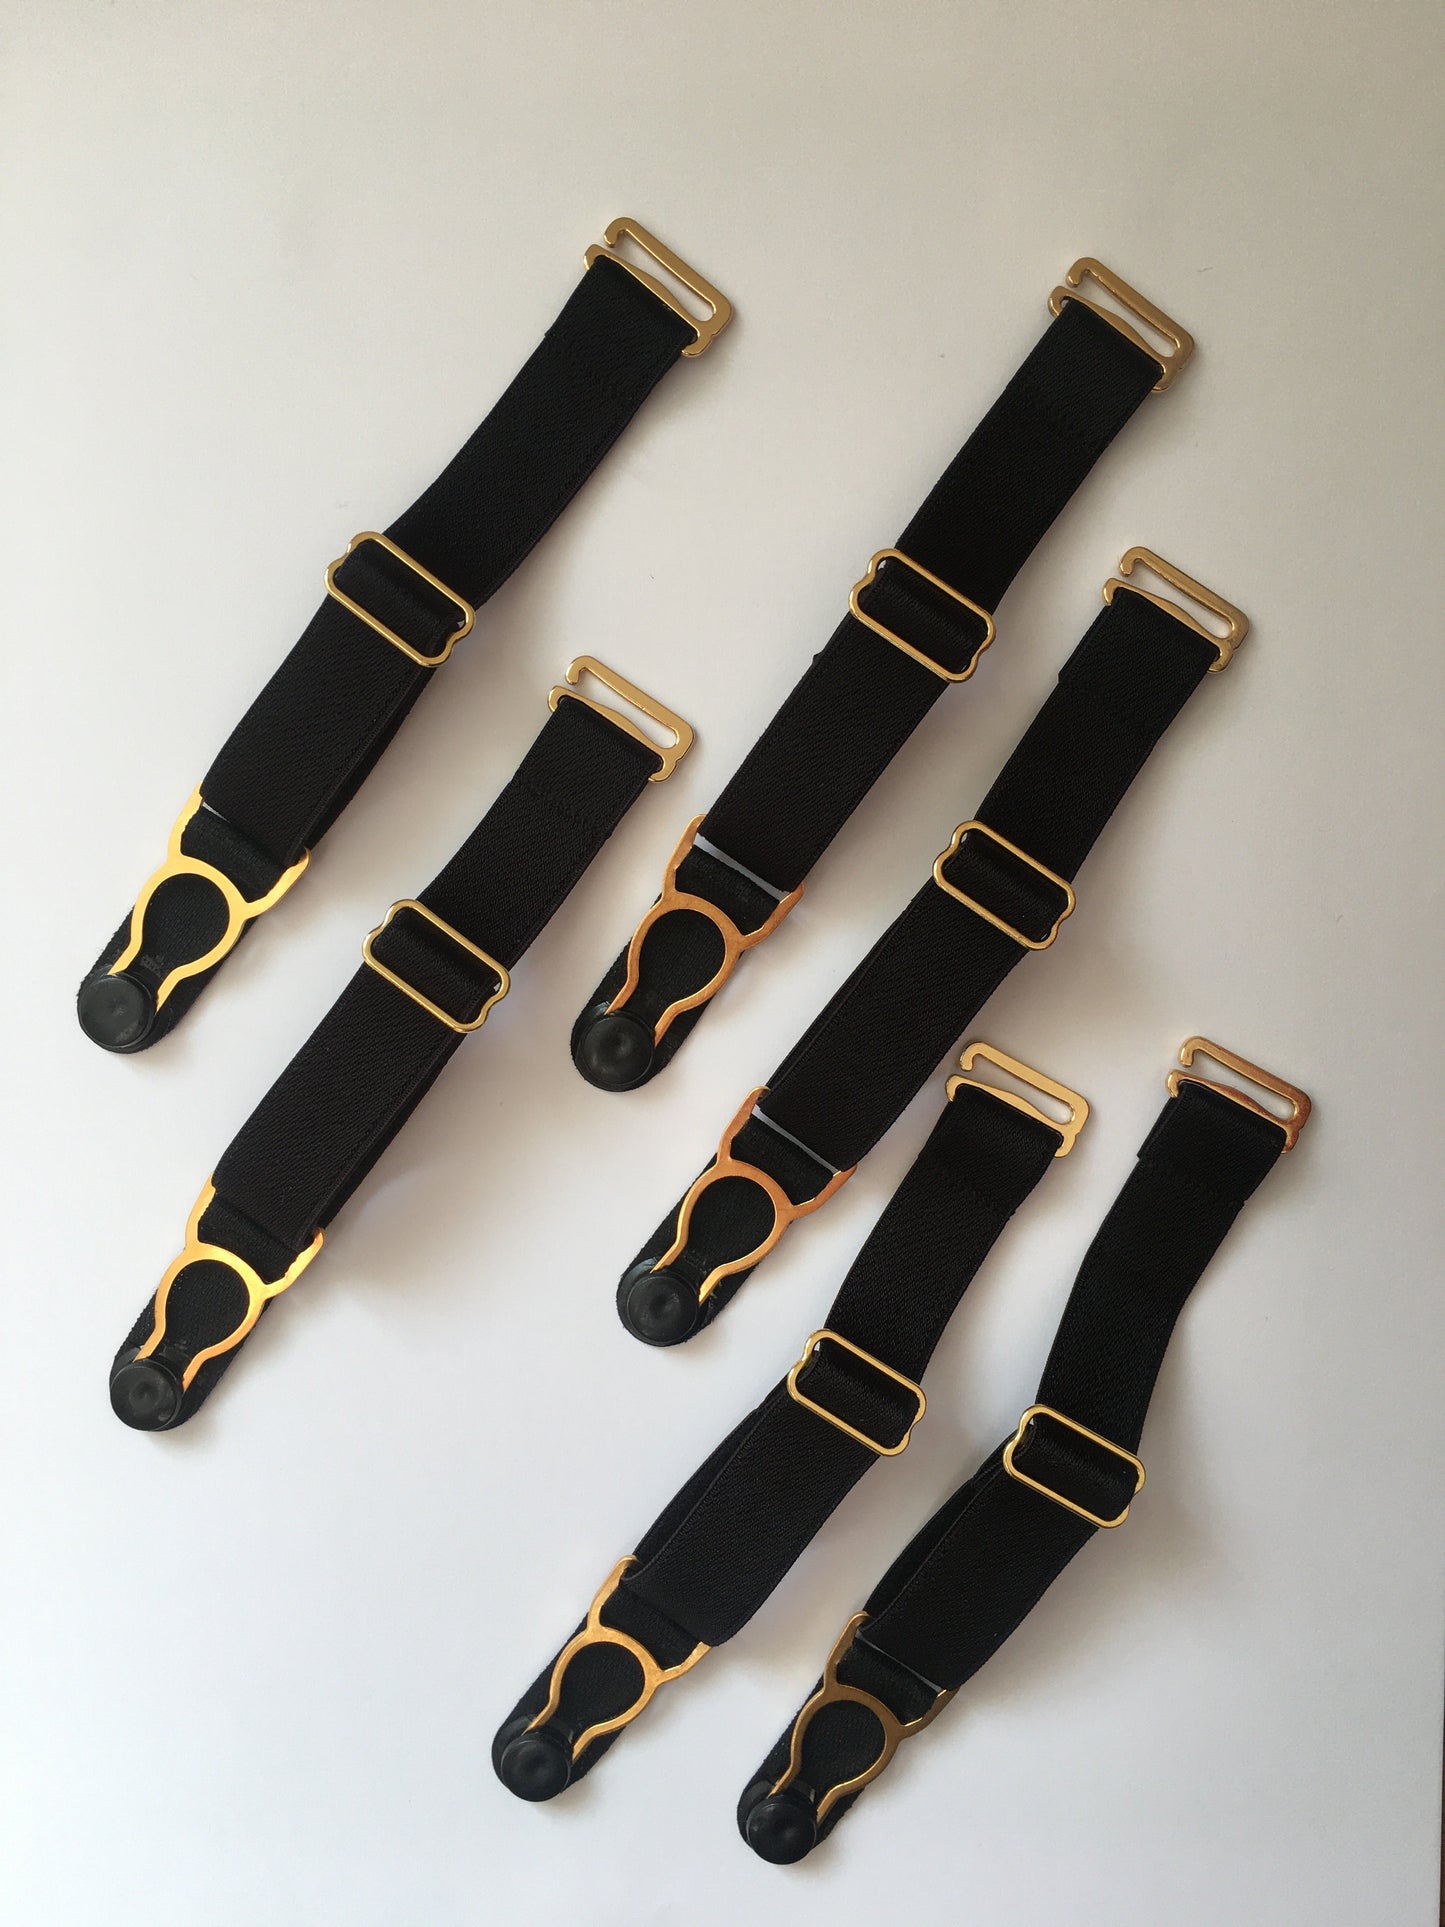 gold metal detachable removeable replacement suspender garter straps for lingerie corsets basques black and gold findings